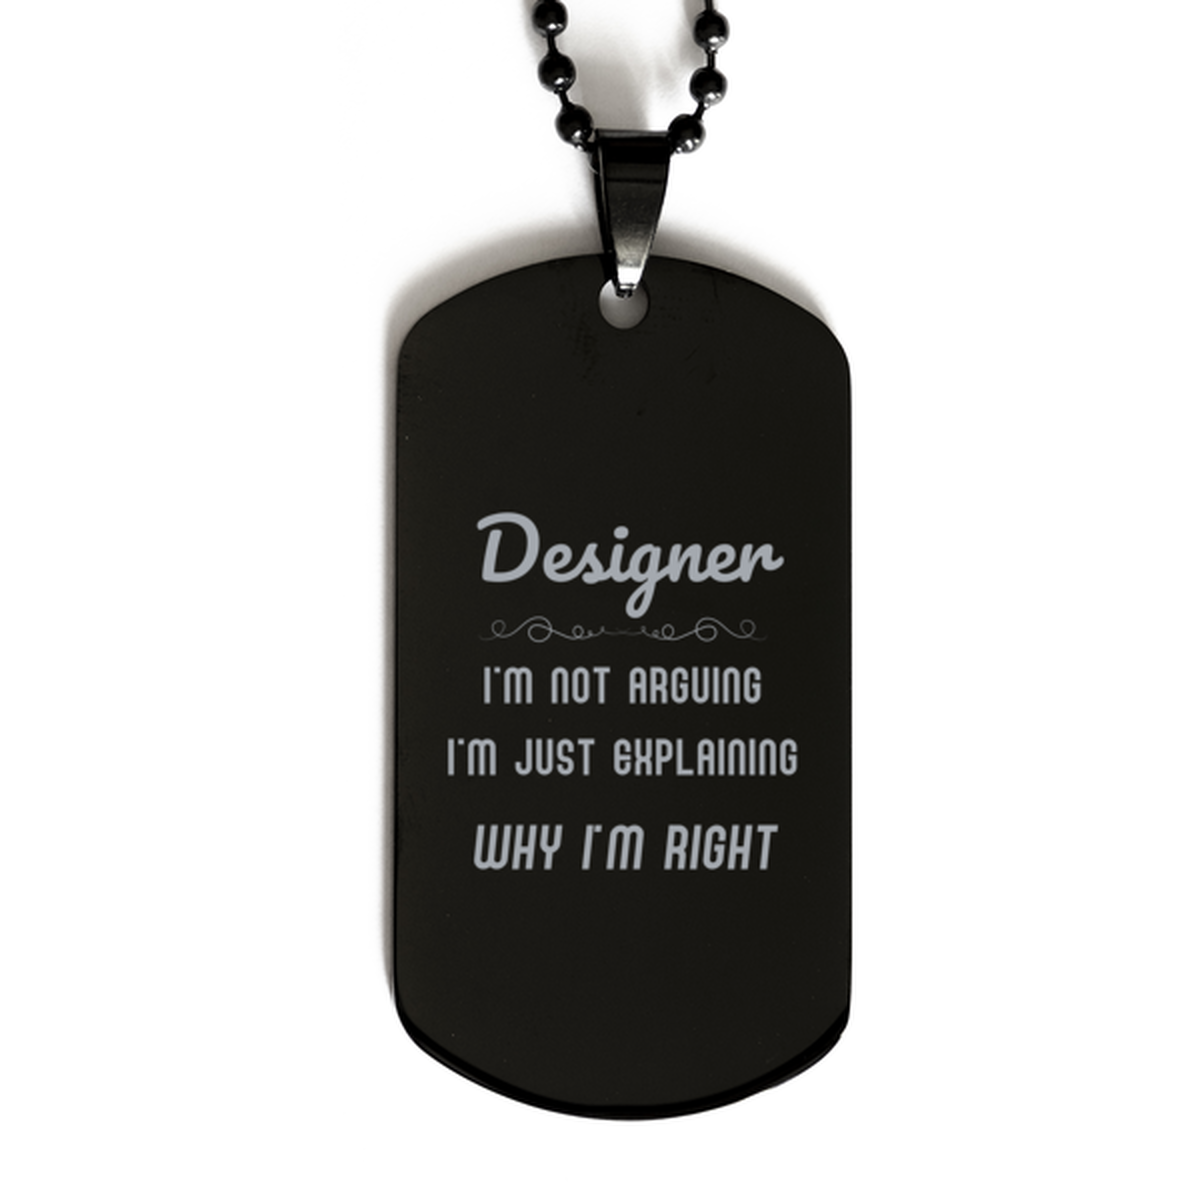 Designer I'm not Arguing. I'm Just Explaining Why I'm RIGHT Black Dog Tag, Funny Saying Quote Designer Gifts For Designer Graduation Birthday Christmas Gifts for Men Women Coworker